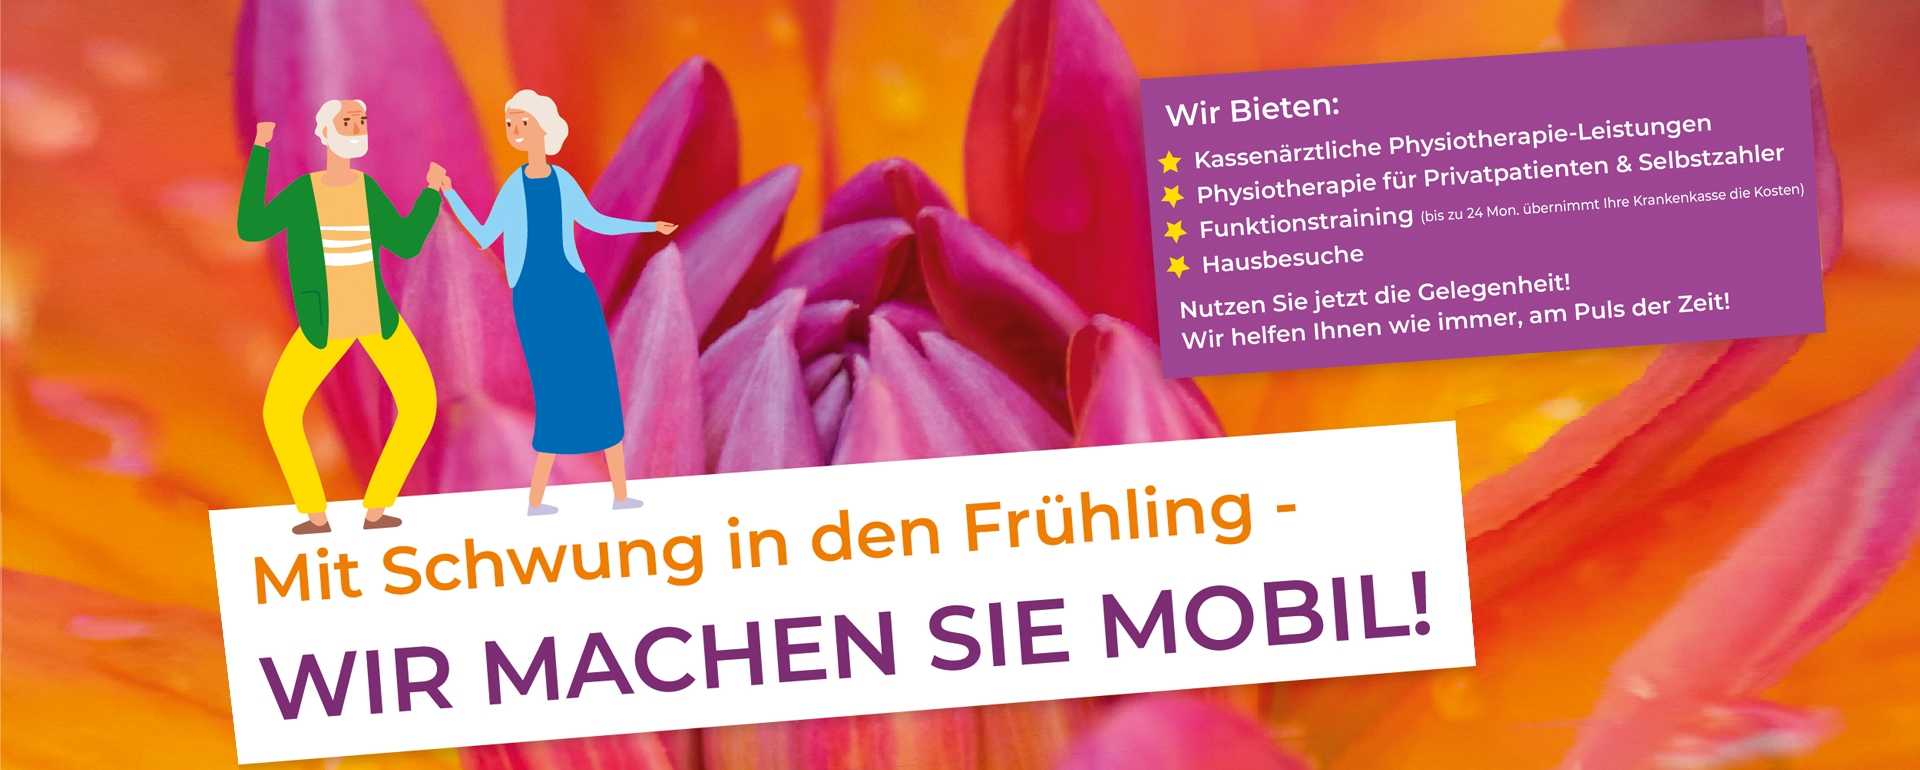 Fit in den Frühling 2023 - Physiotherapie Hannover